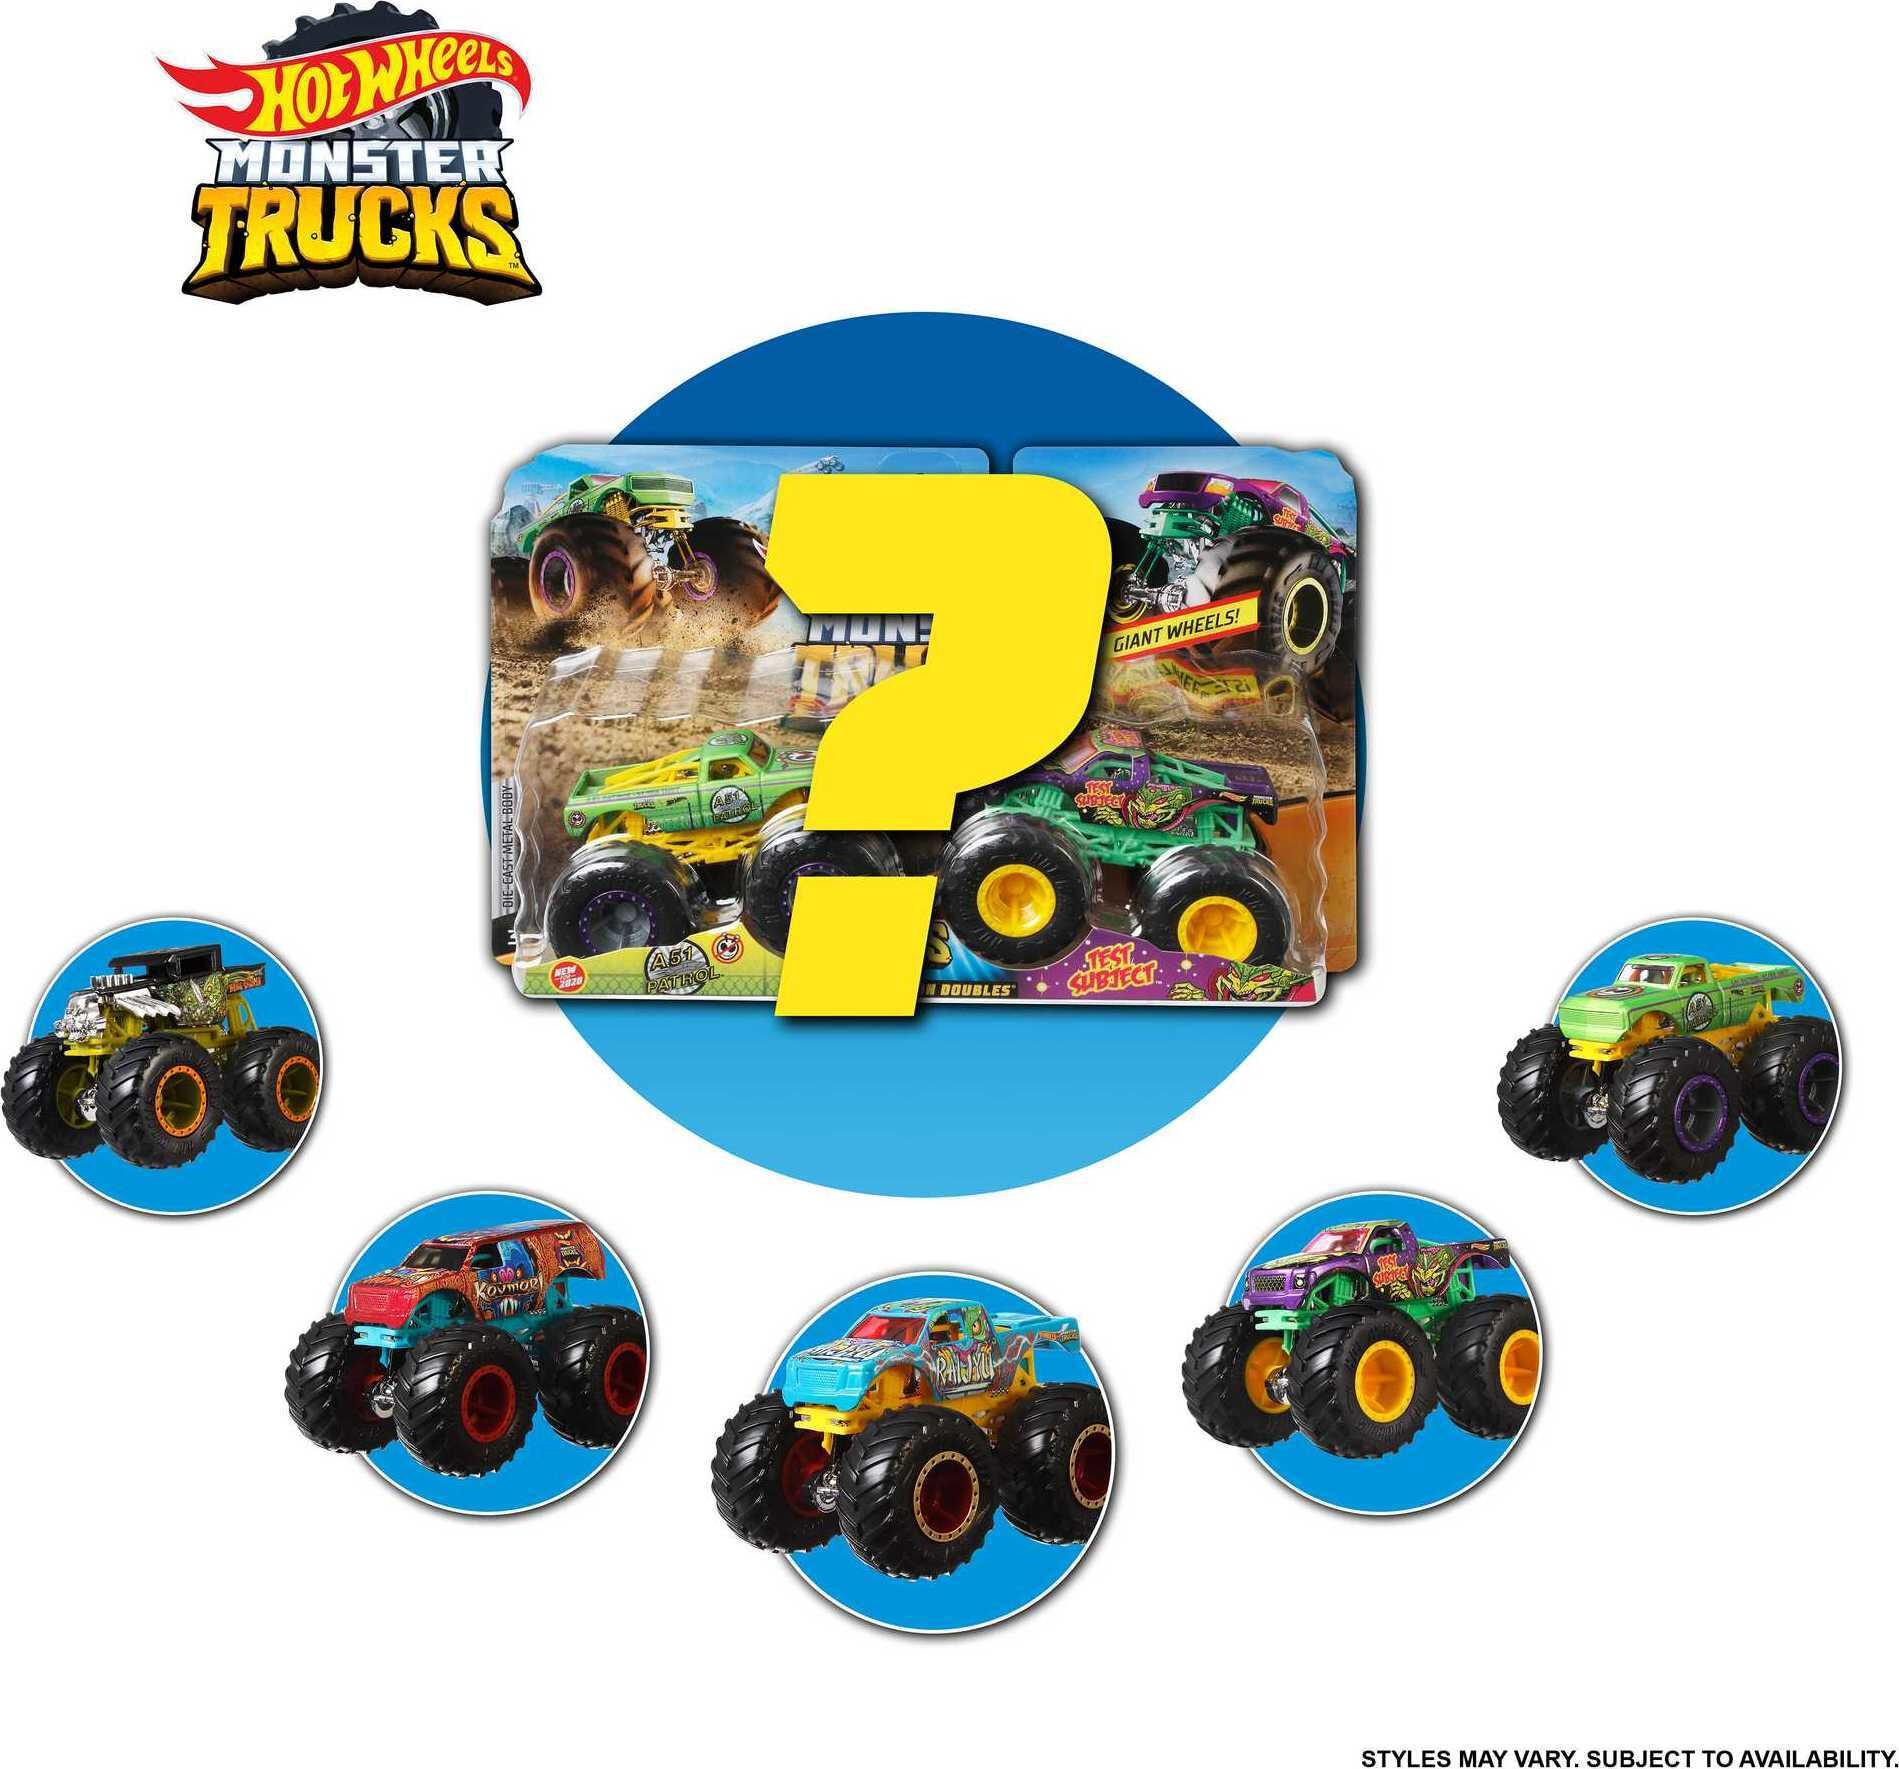 Hot Wheels Monster Trucks Demolition Doubles, Set of 2 Toy Trucks (Styles May Vary) - image 3 of 6